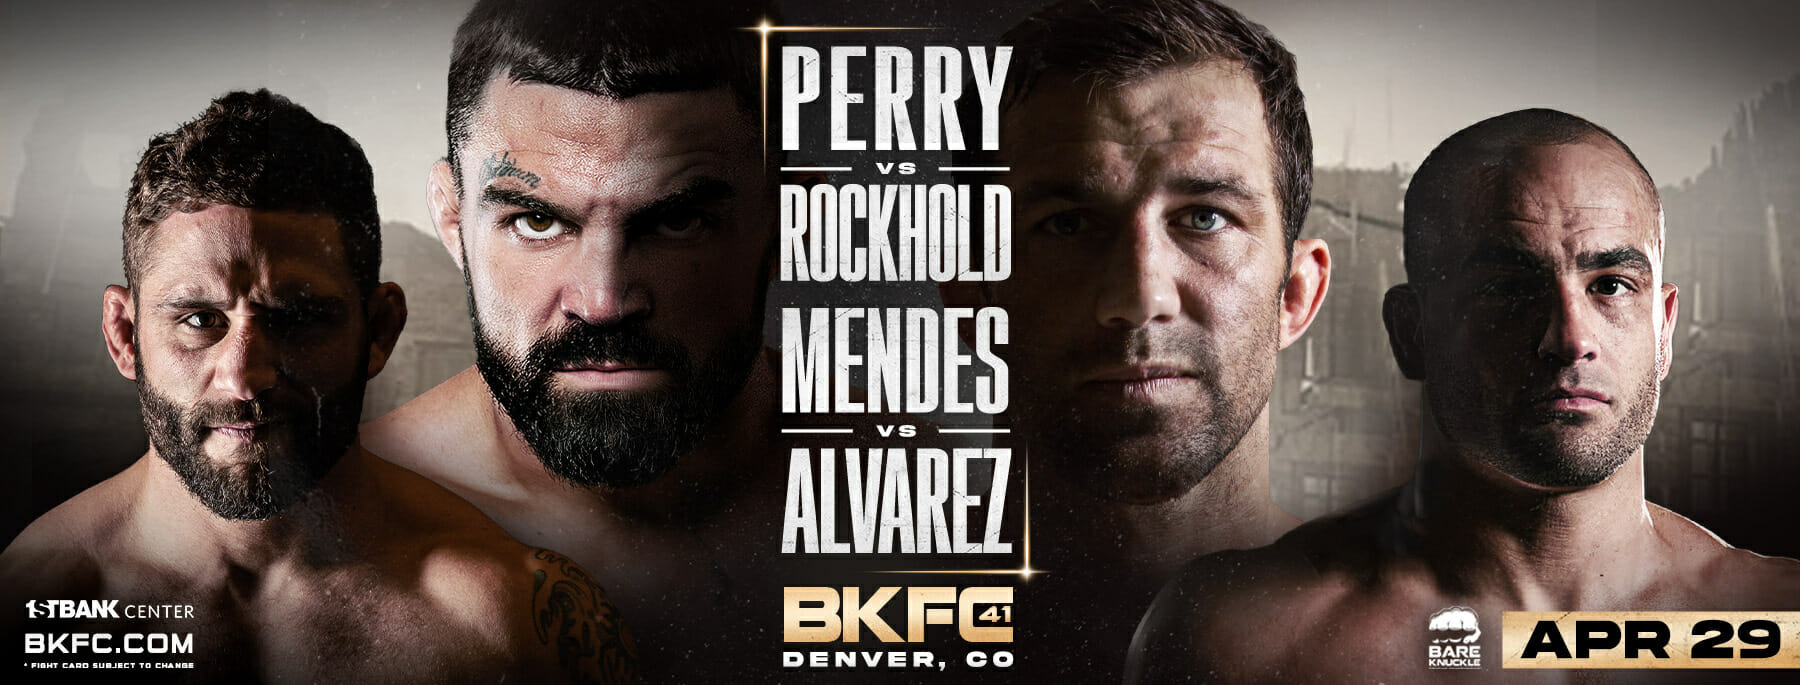 How to Watch BKFC 41 Perry vs Rockhold and Mendes vs Alvarez